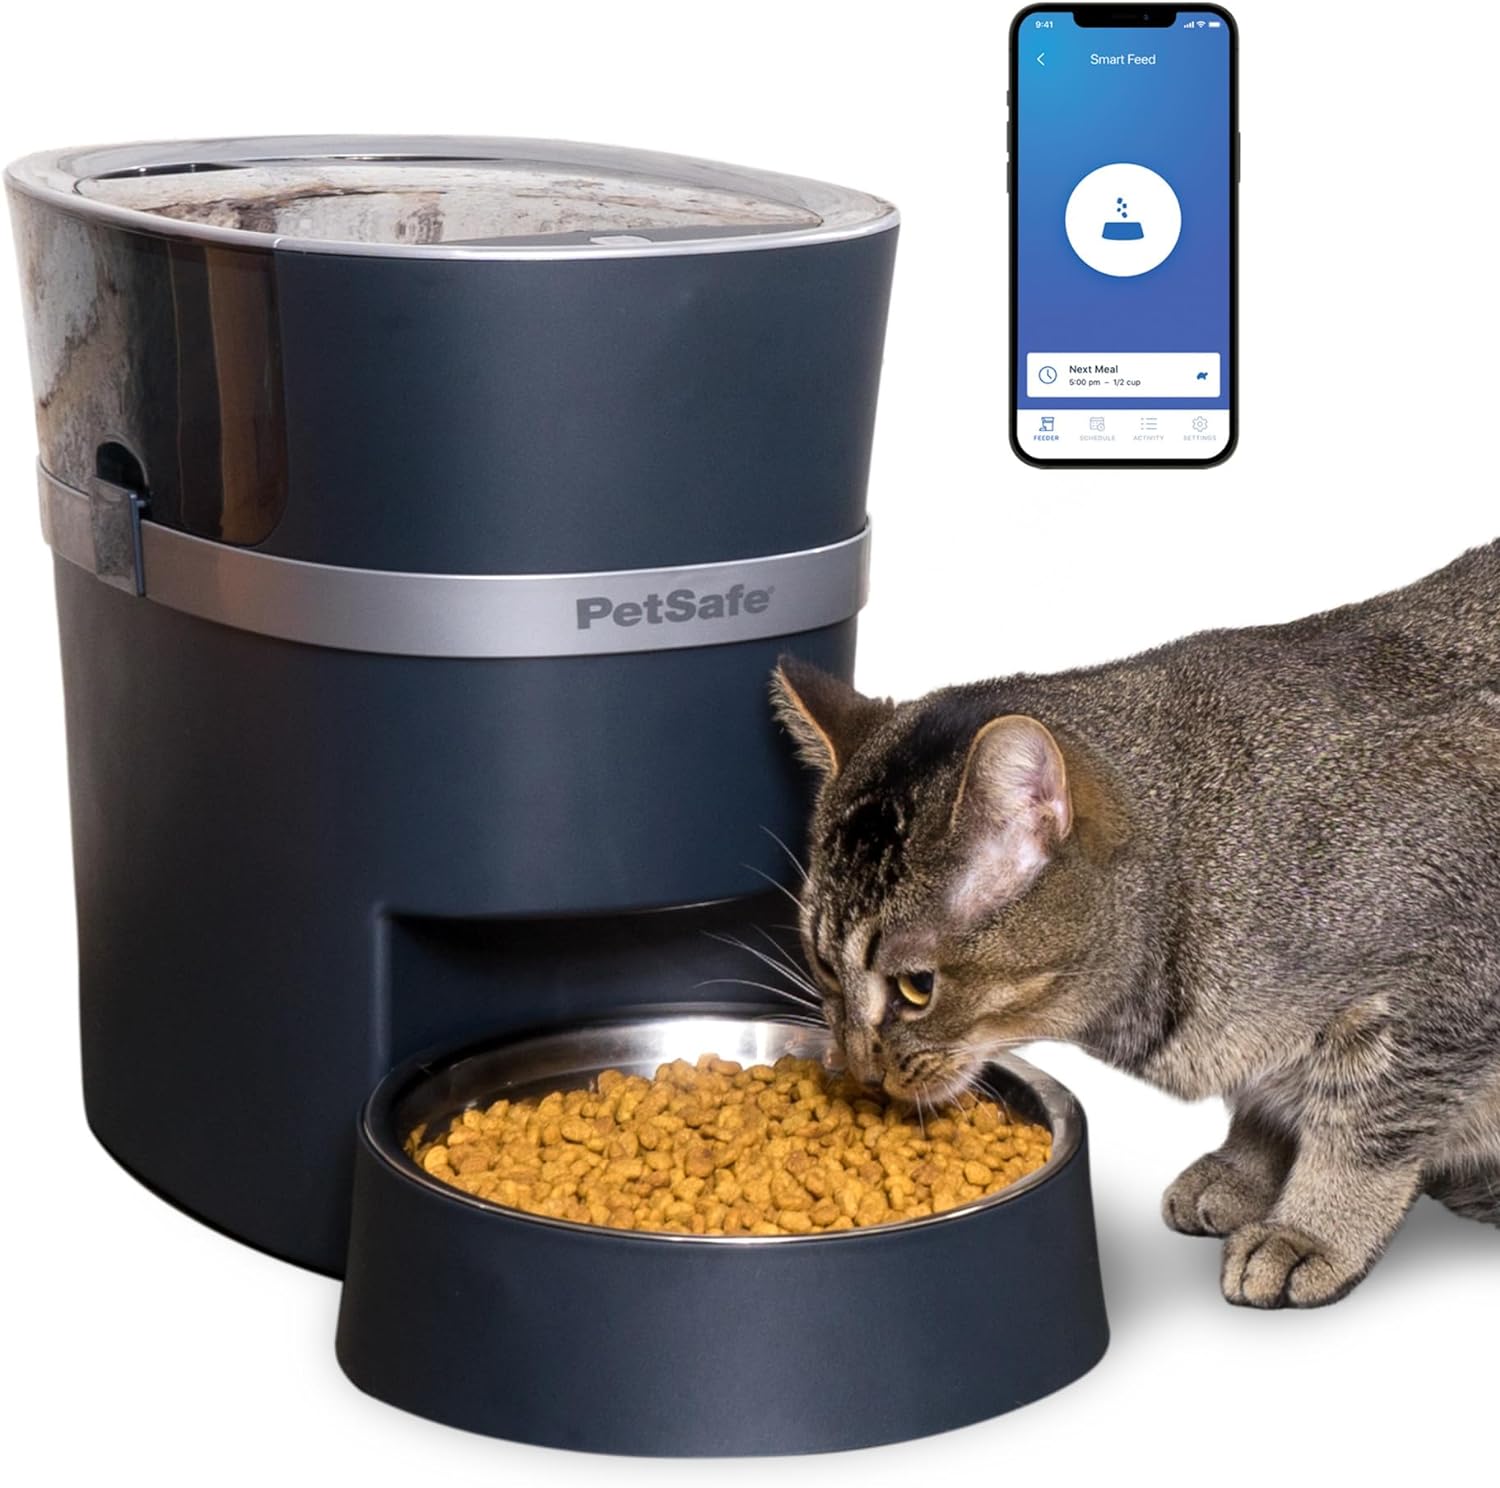 PetSafe Smart Feed - Electronic Pet Feeder for Cats & Dogs